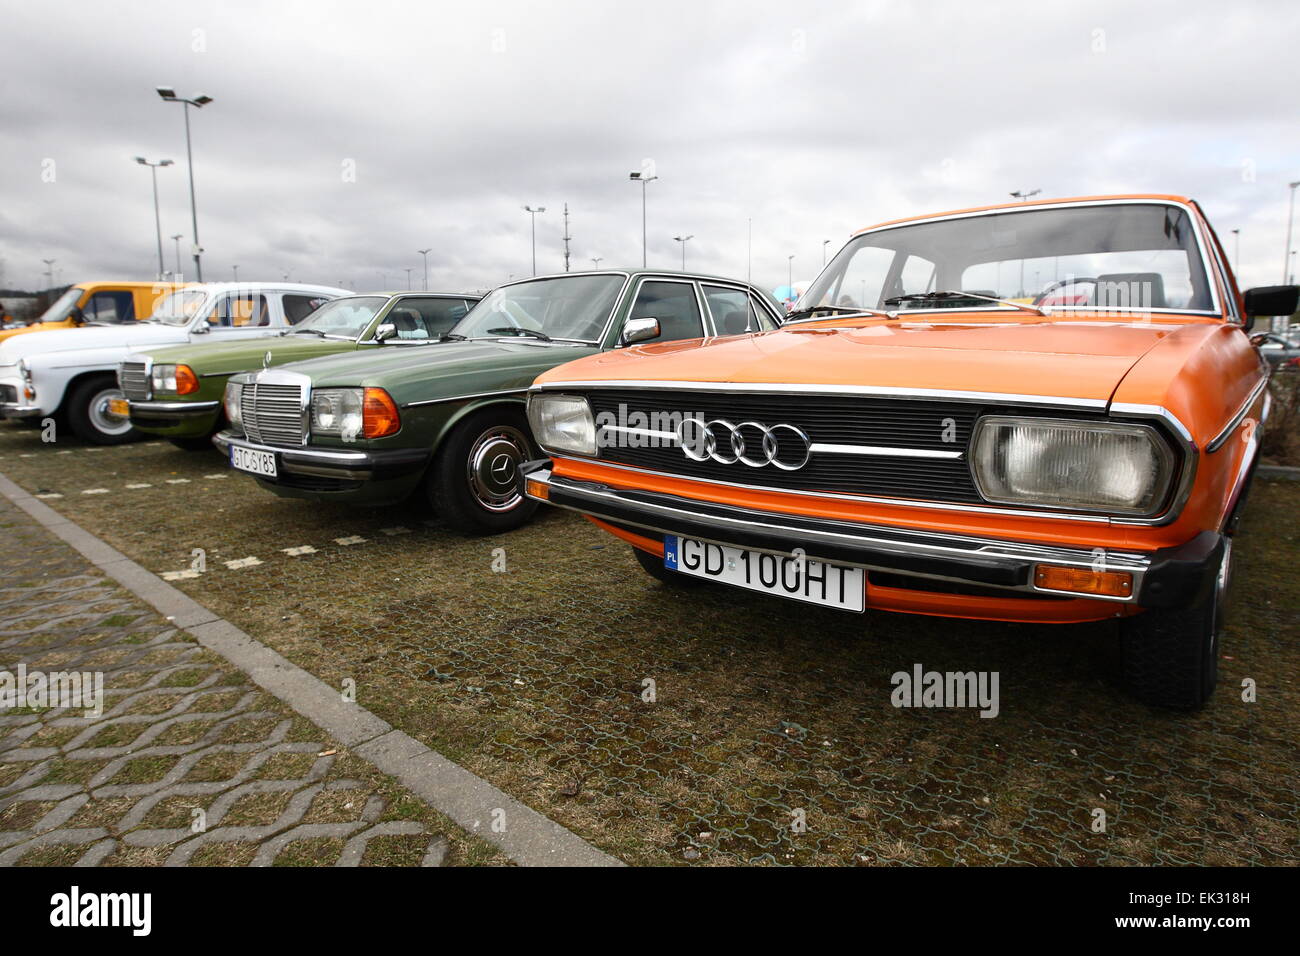 Gdansk, Poland. 6th April, 2015. Classic cars seazon opening in Gdansk. Hundreds of classic cars enthusiast shows their cars , all build before the 1989. Pictured : German Audi 100 classic car Credit:  Michal Fludra/Alamy Live News Stock Photo